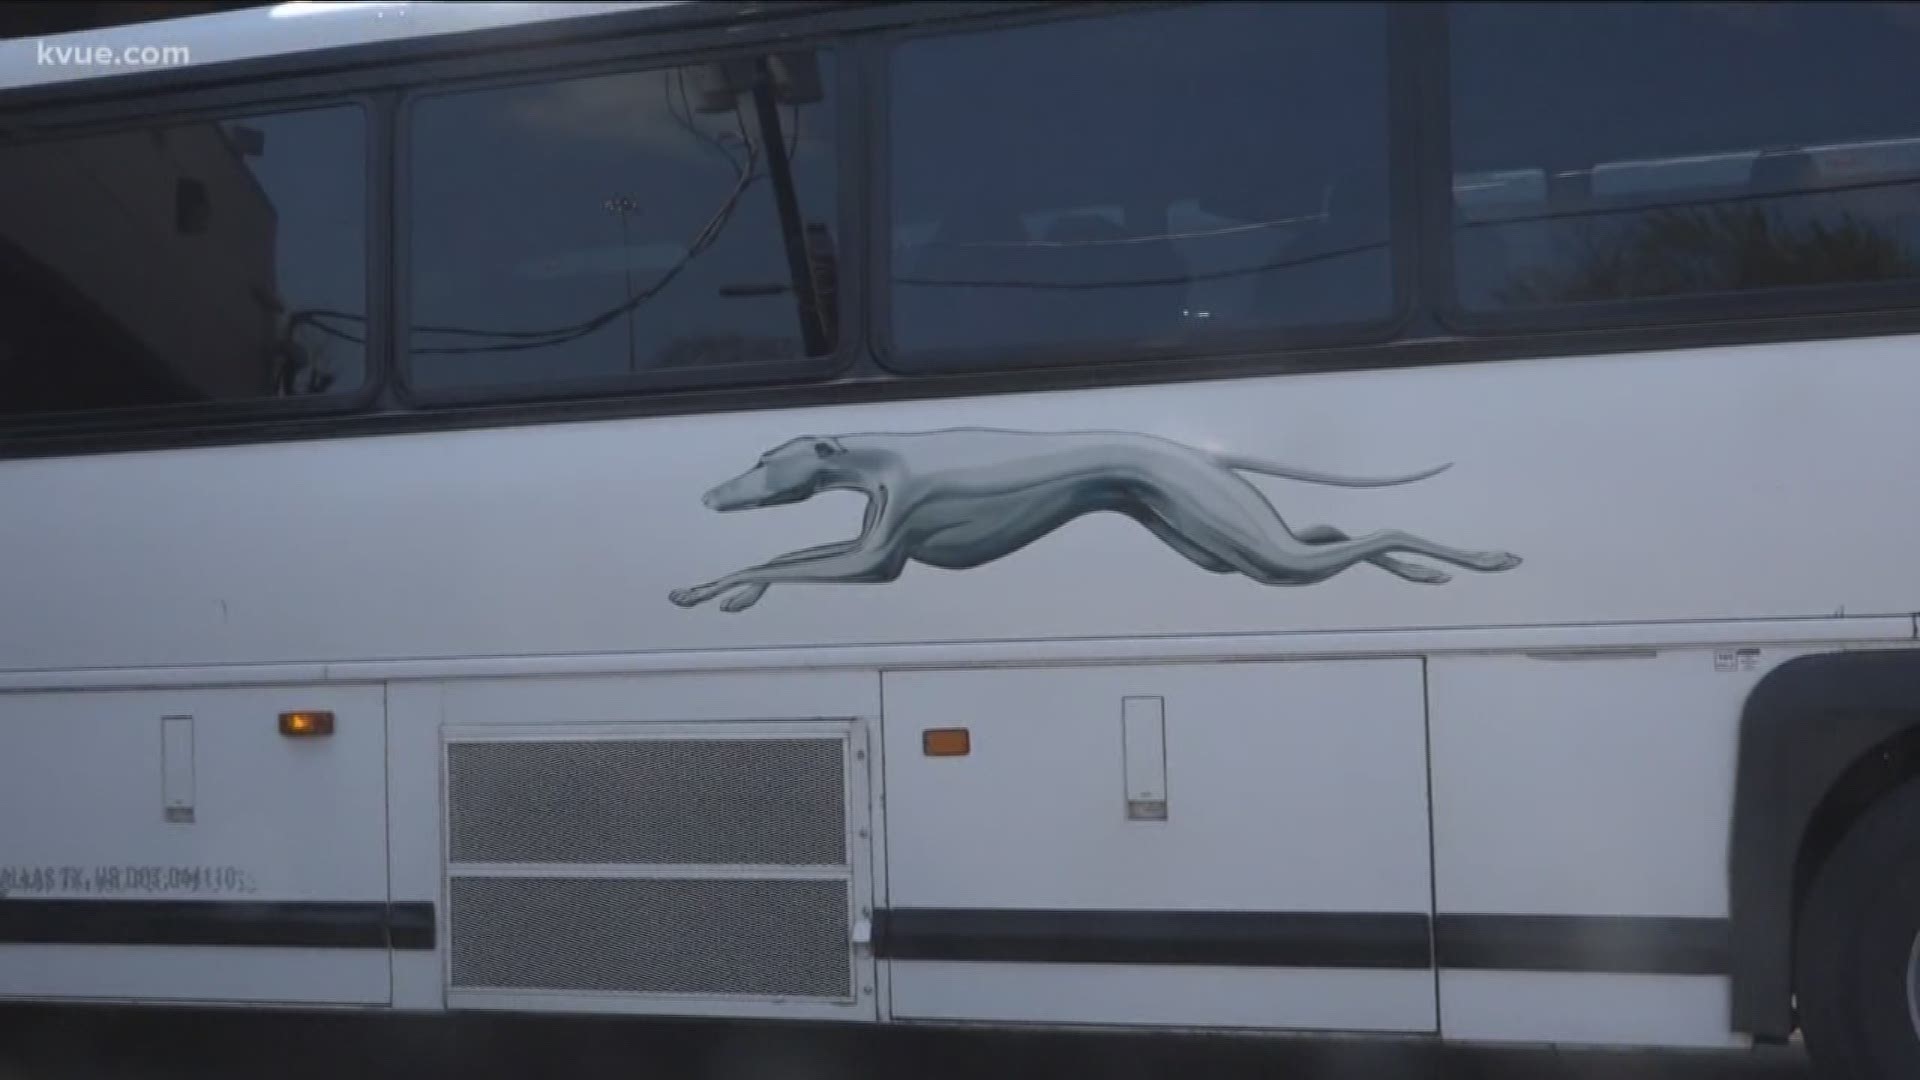 We are learning more about a policy change for Greyhound buses – and how it will impact workers and immigrants.